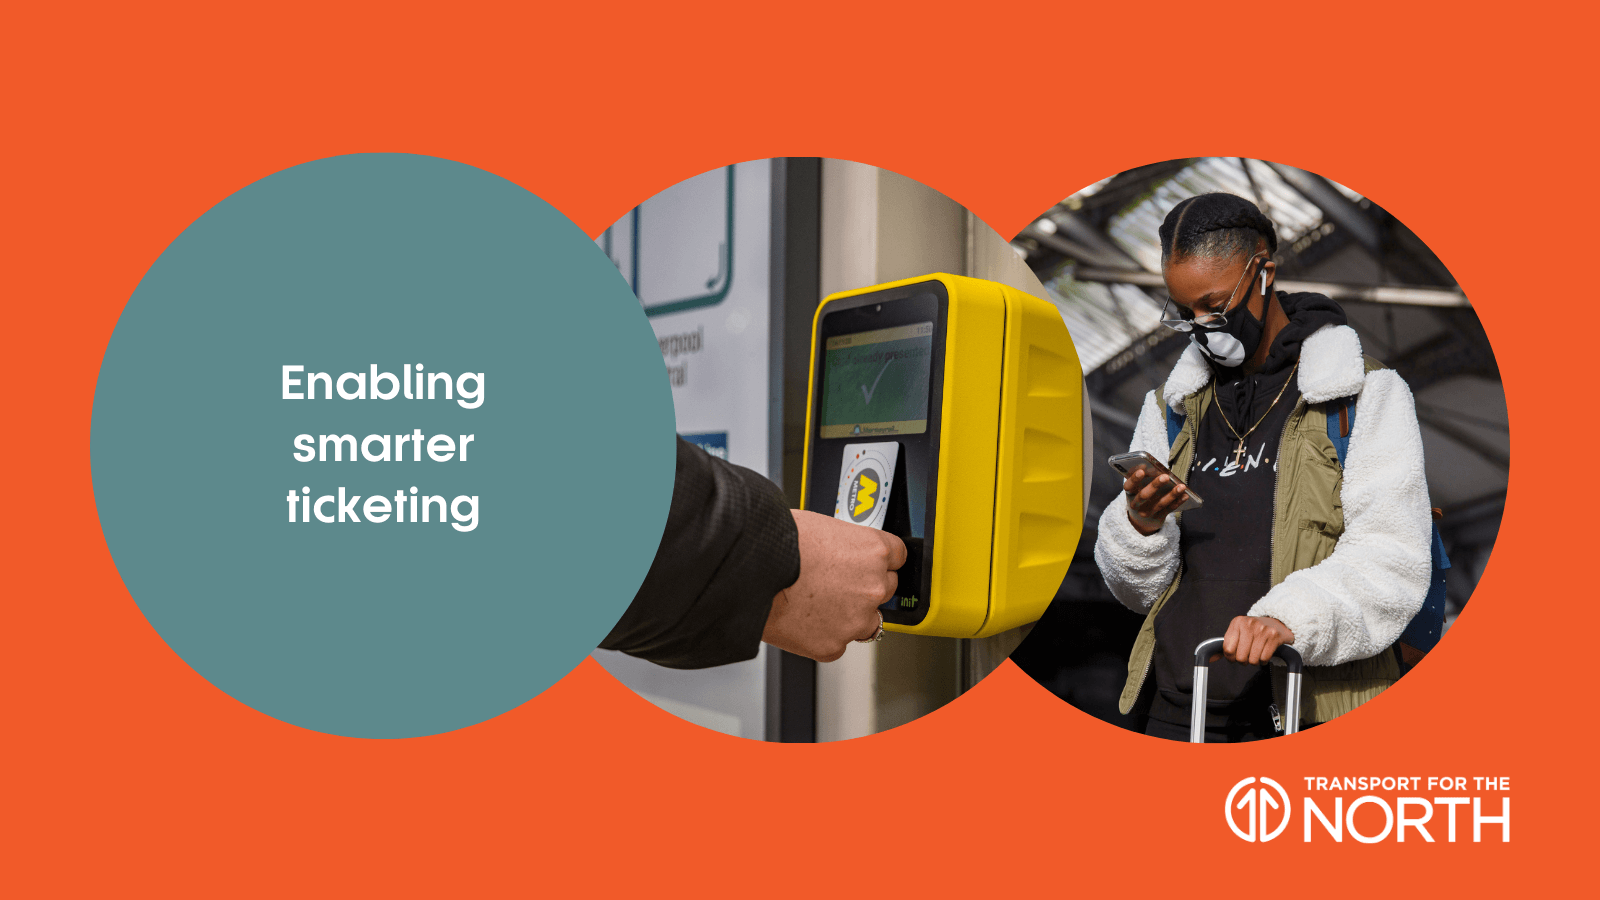 Enabling smarter ticketing in the Liverpool City Region